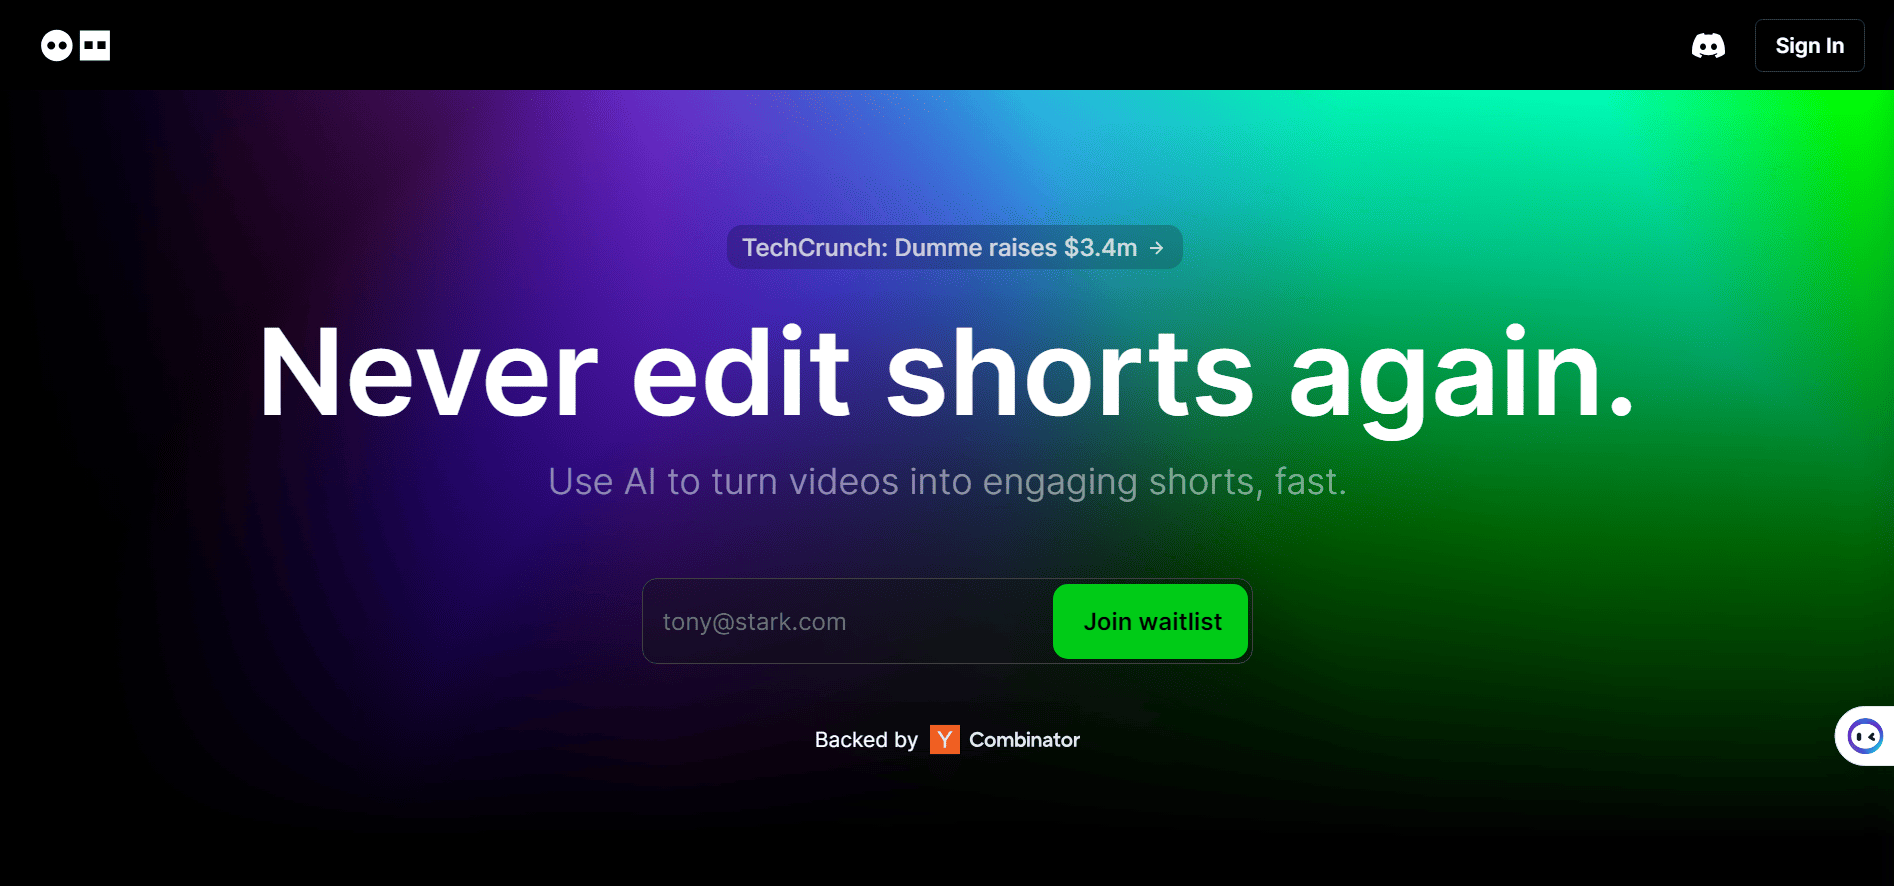 Dumme Short-form video generator tool for small business marketing